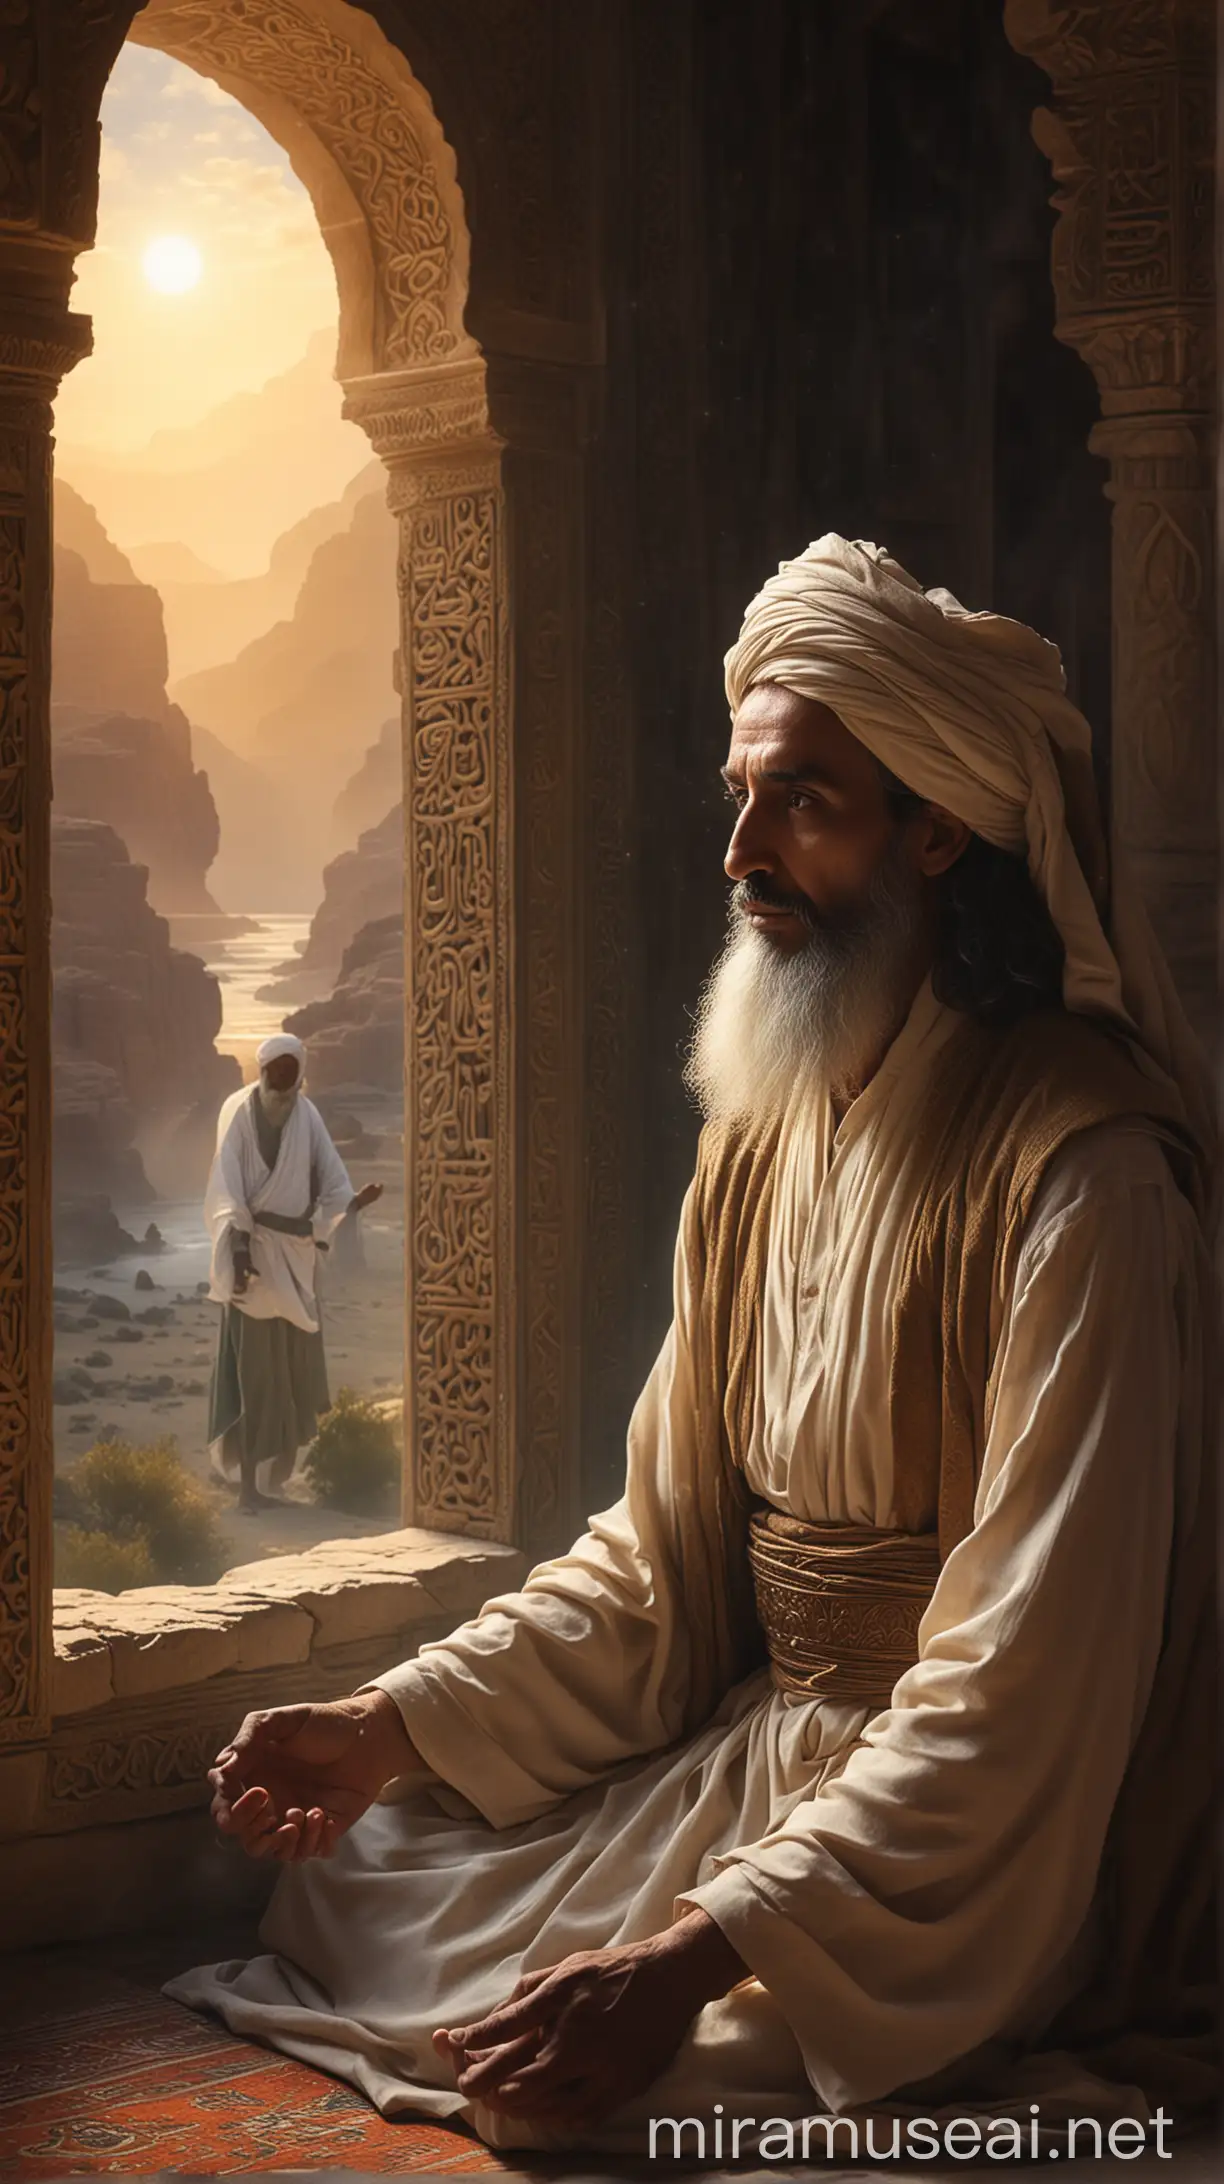 A mystical moment where Khidr Aleyhisselam appears before the praying man. Khidr is enveloped in a soft, radiant light, standing amidst a serene and otherworldly backdrop. The man's eyes widen in awe and wonder.
